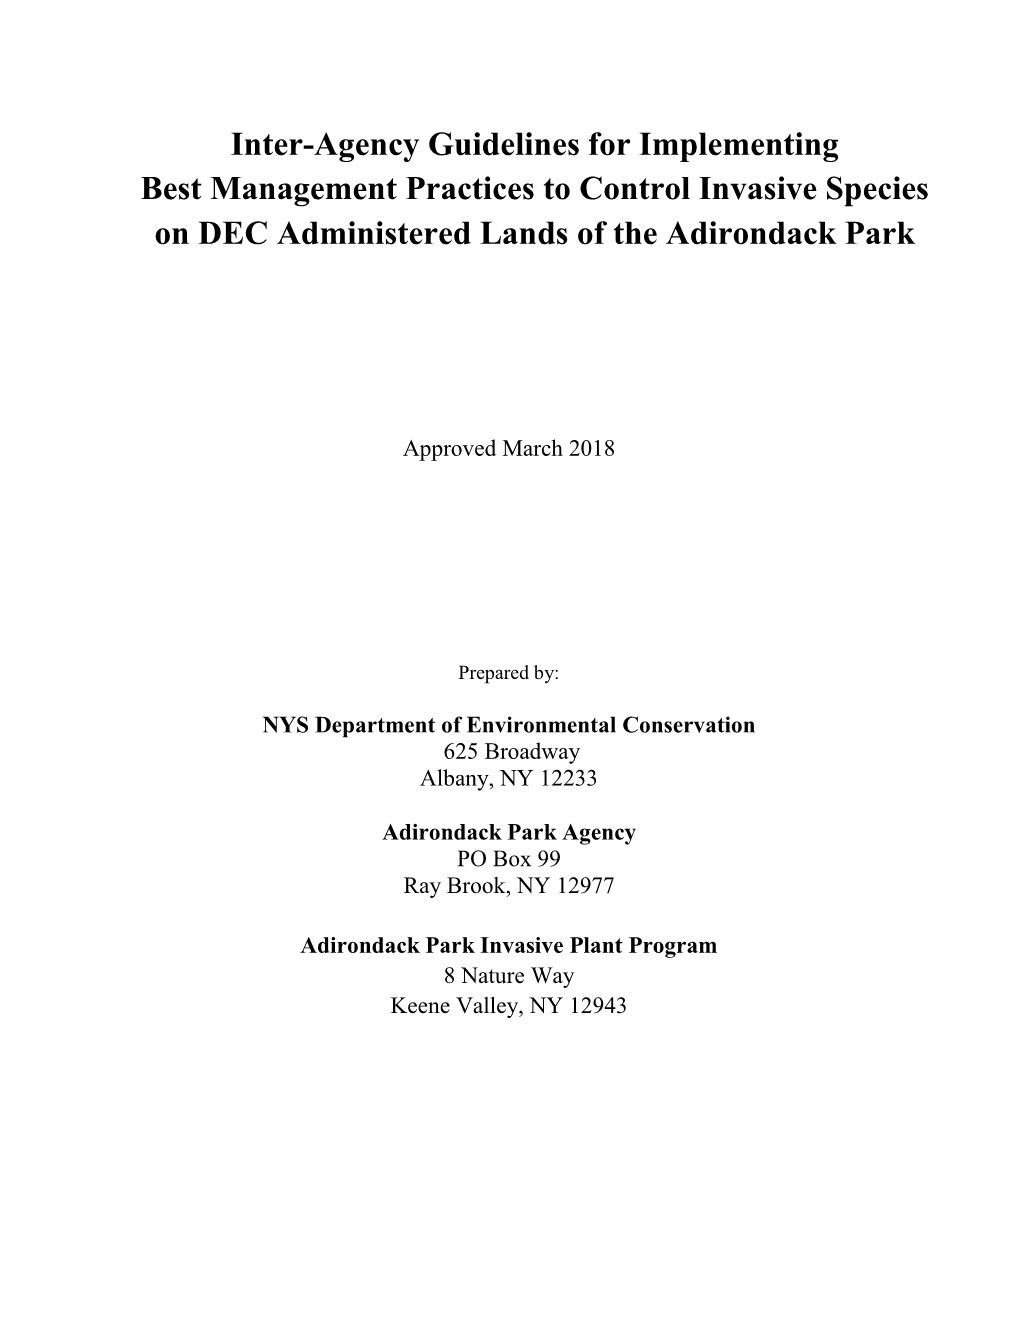 Inter-Agency Guidelines for Implementing Best Management Practices to Control Invasive Species on DEC Administered Lands of the Adirondack Park